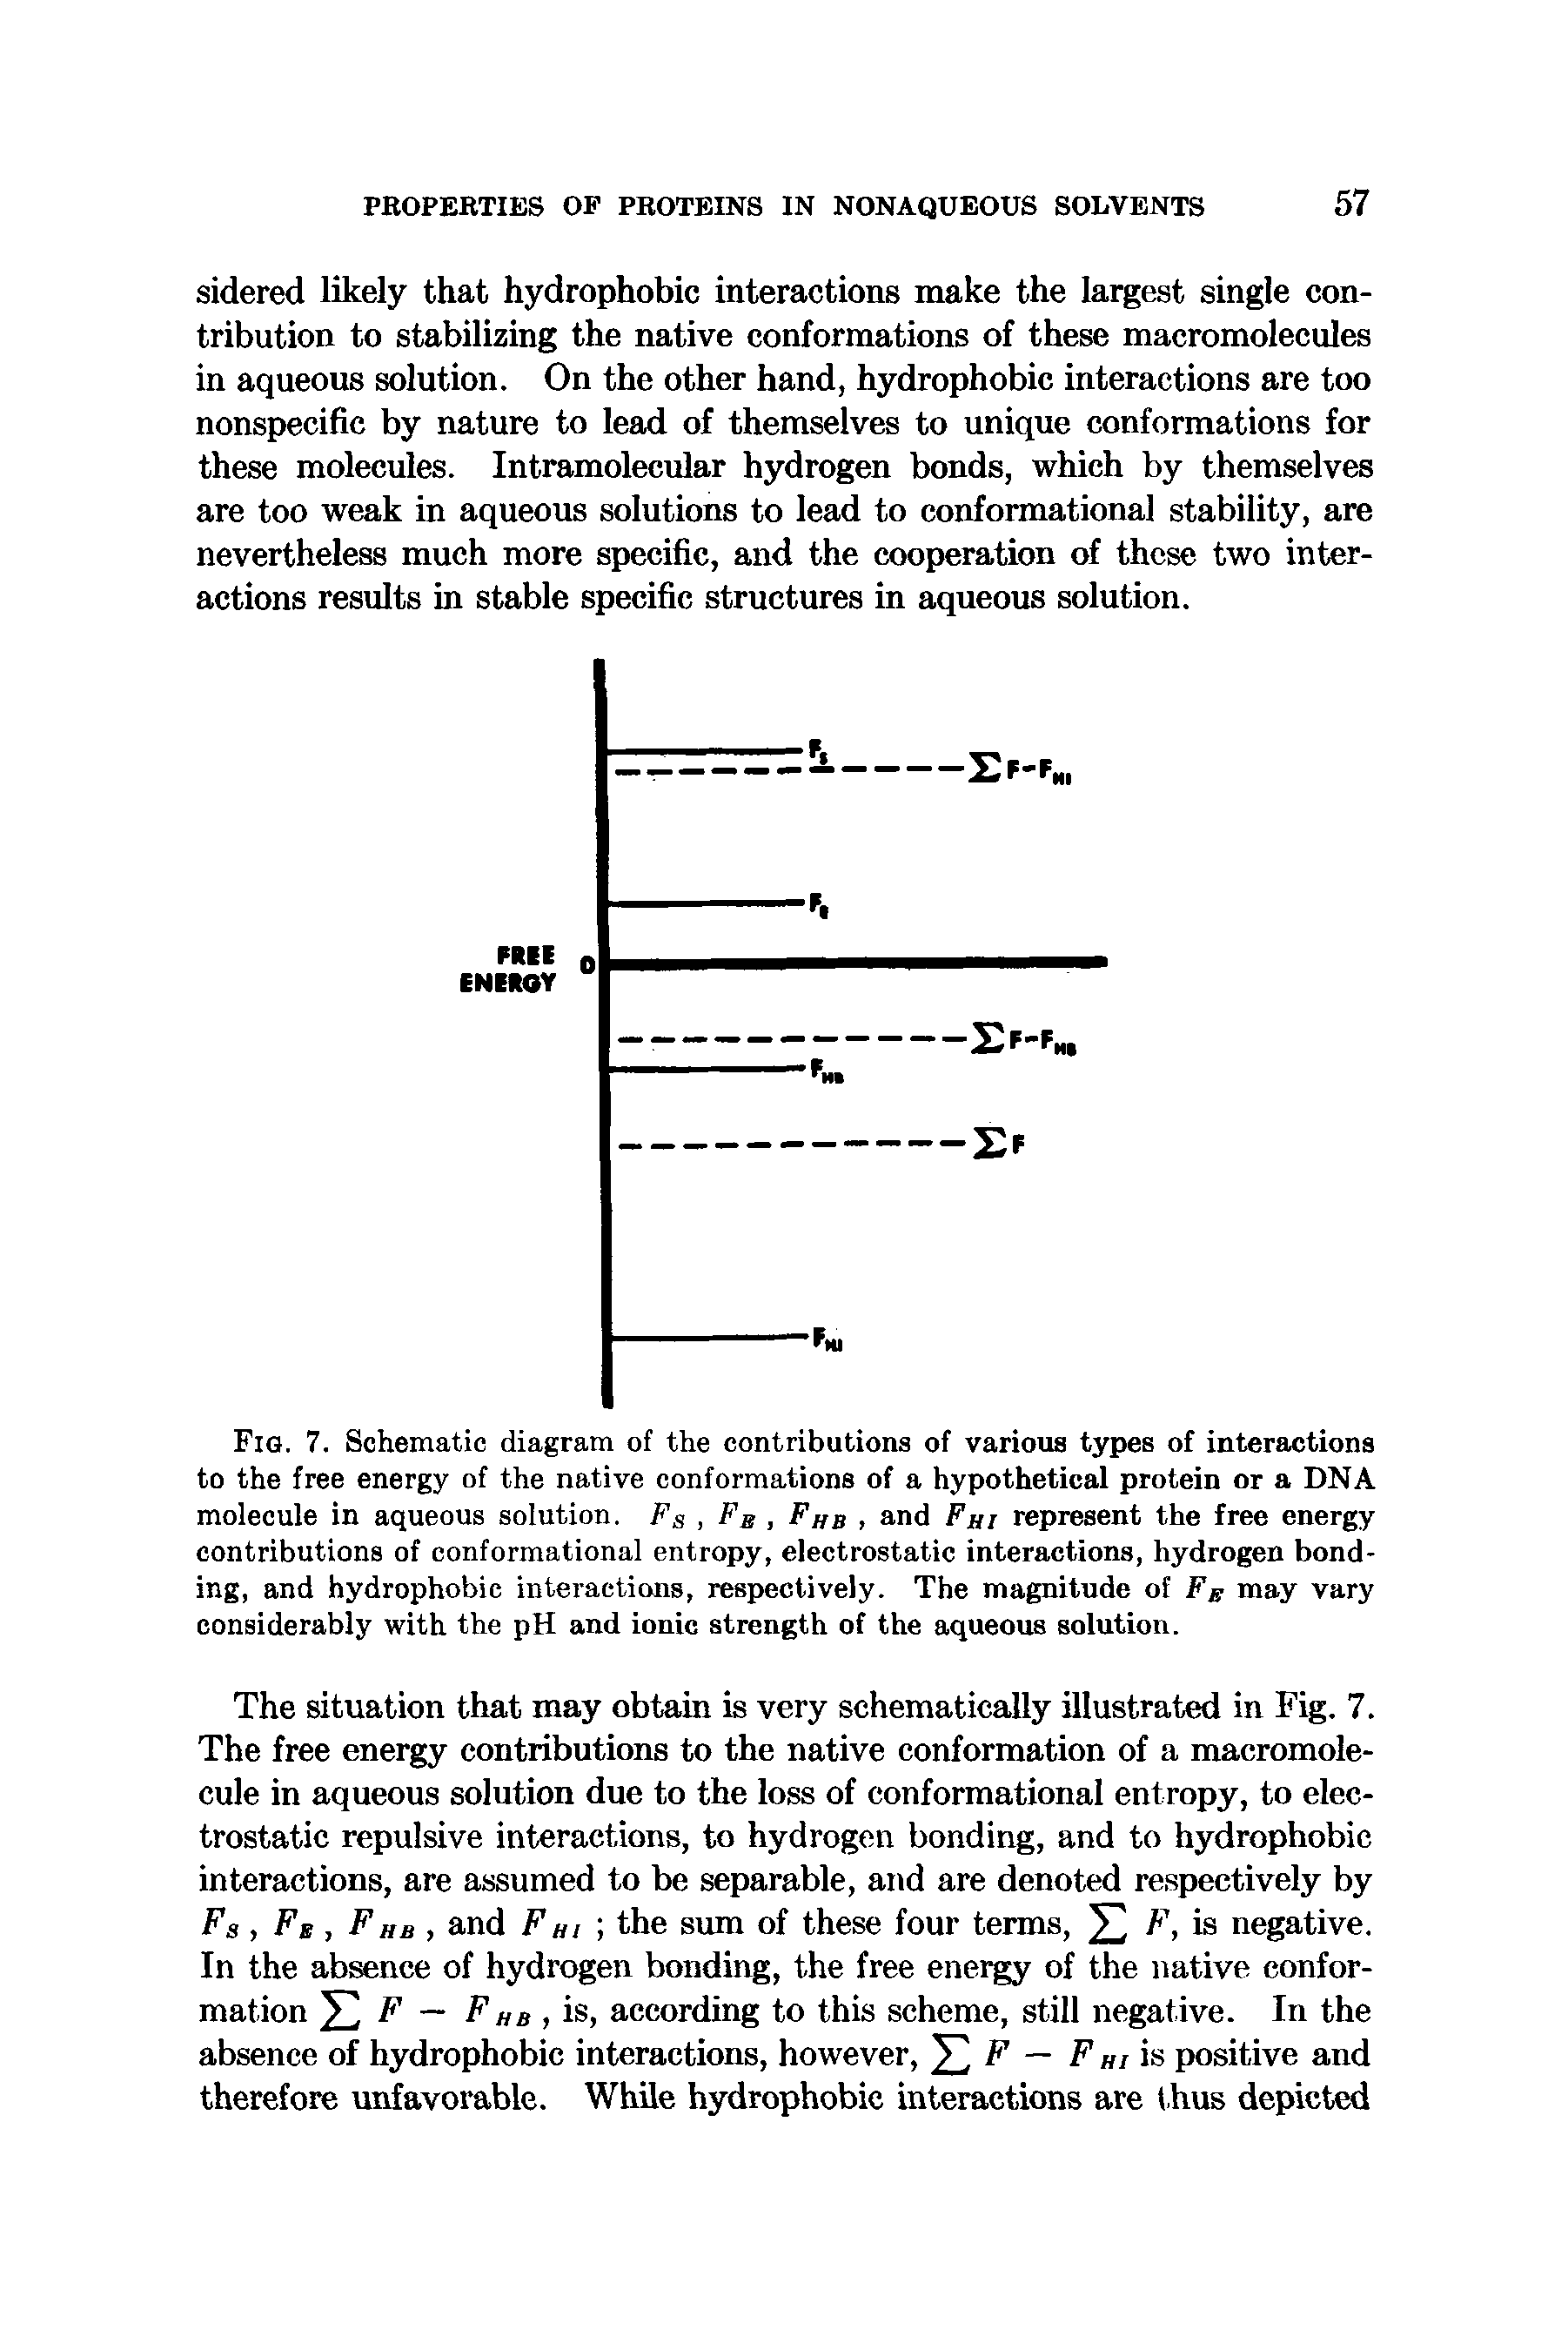 Fig. 7. Schematic diagram of the contributions of various types of interactions to the free energy of the native conformations of a hypothetical protein or a DNA molecule in aqueous solution. Fs, Fb, Fi/b, and Fm represent the free energy contributions of conformational entropy, electrostatic interactions, hydrogen bonding, and hydrophobic interactions, respectively. The magnitude oi Fg may vary considerably with the pH and ionic strength of the aqueous solution.